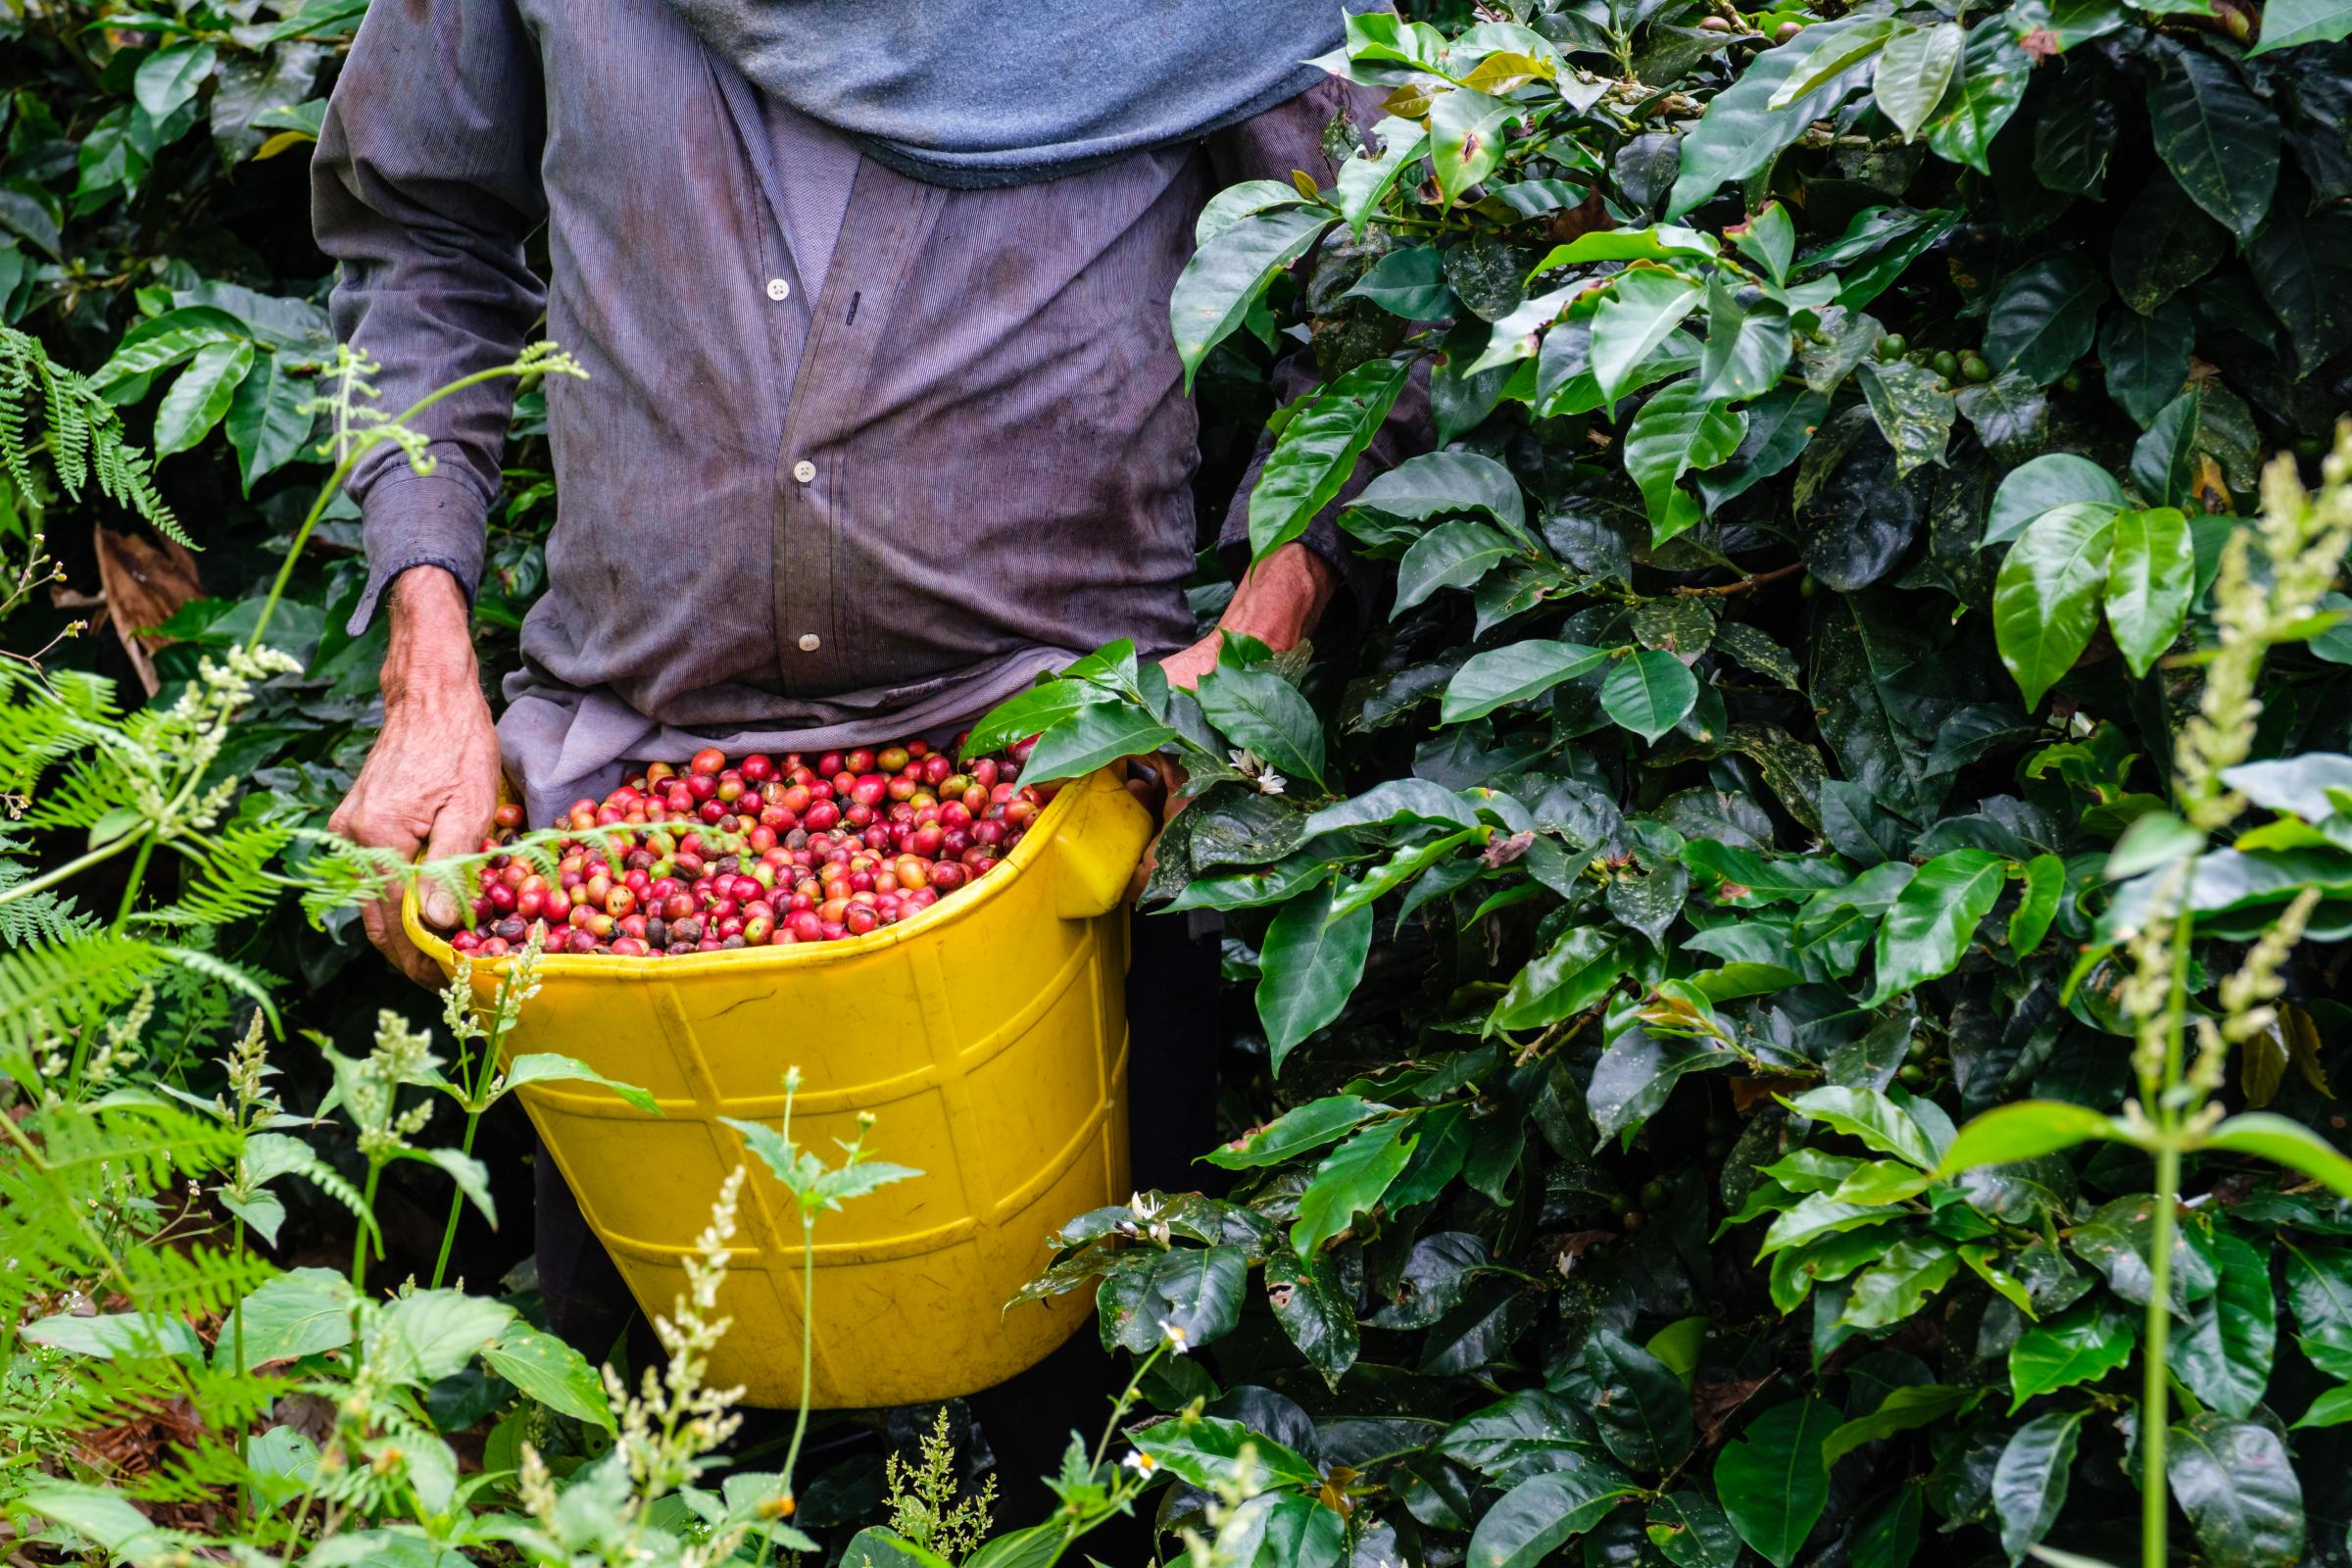 Eje Cafetero Colombia - A worker recolects coffee beans at Finca Las Acacias, Eje...